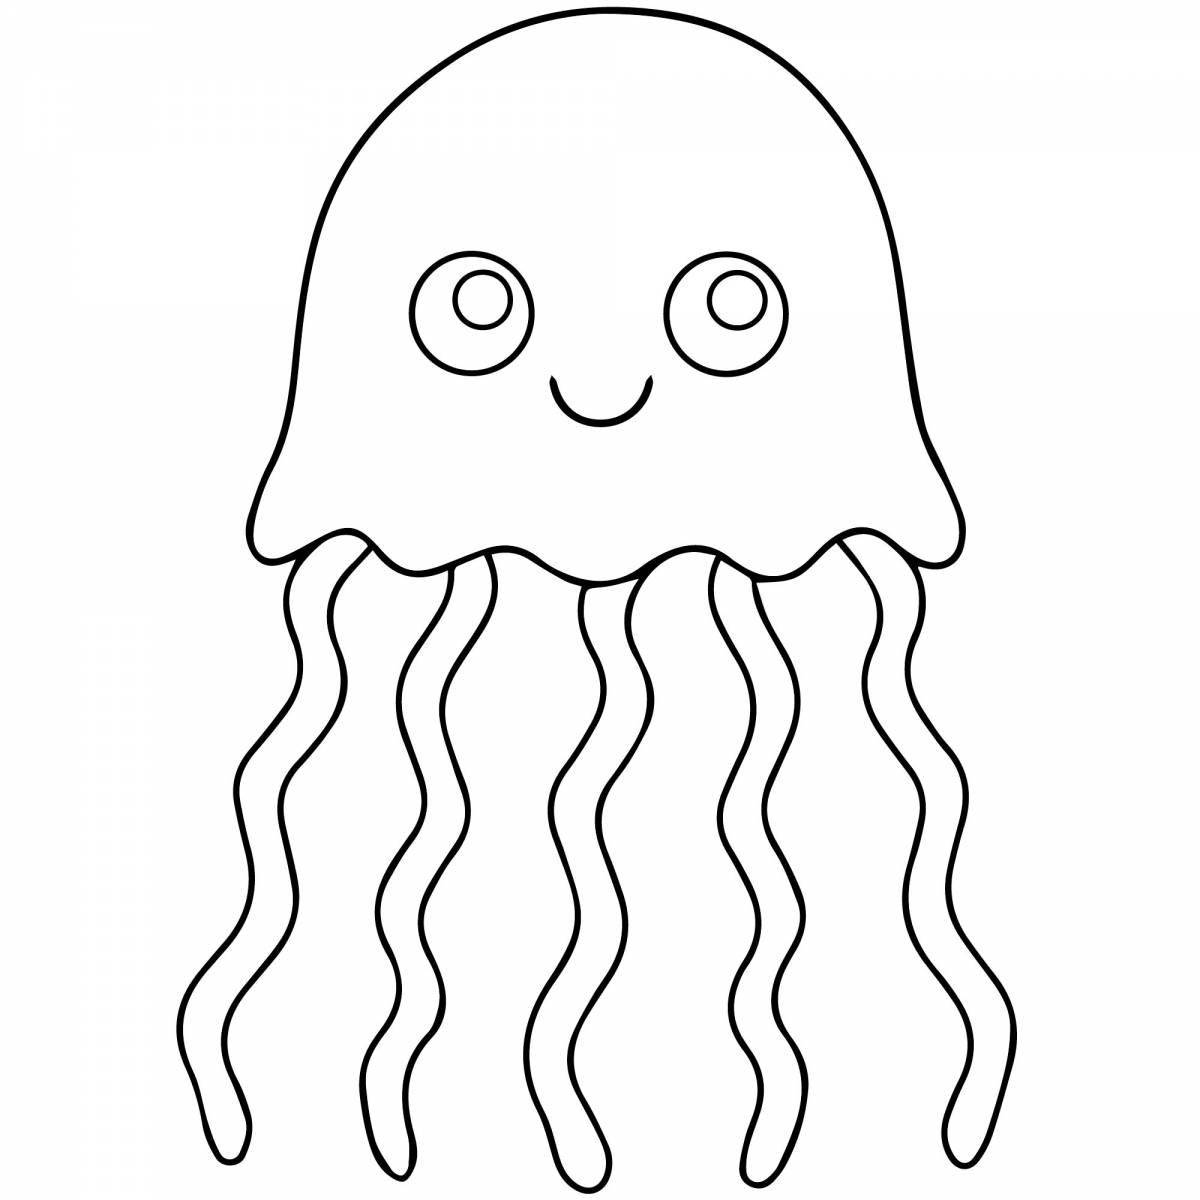 Fabulous jellyfish coloring pages for kids